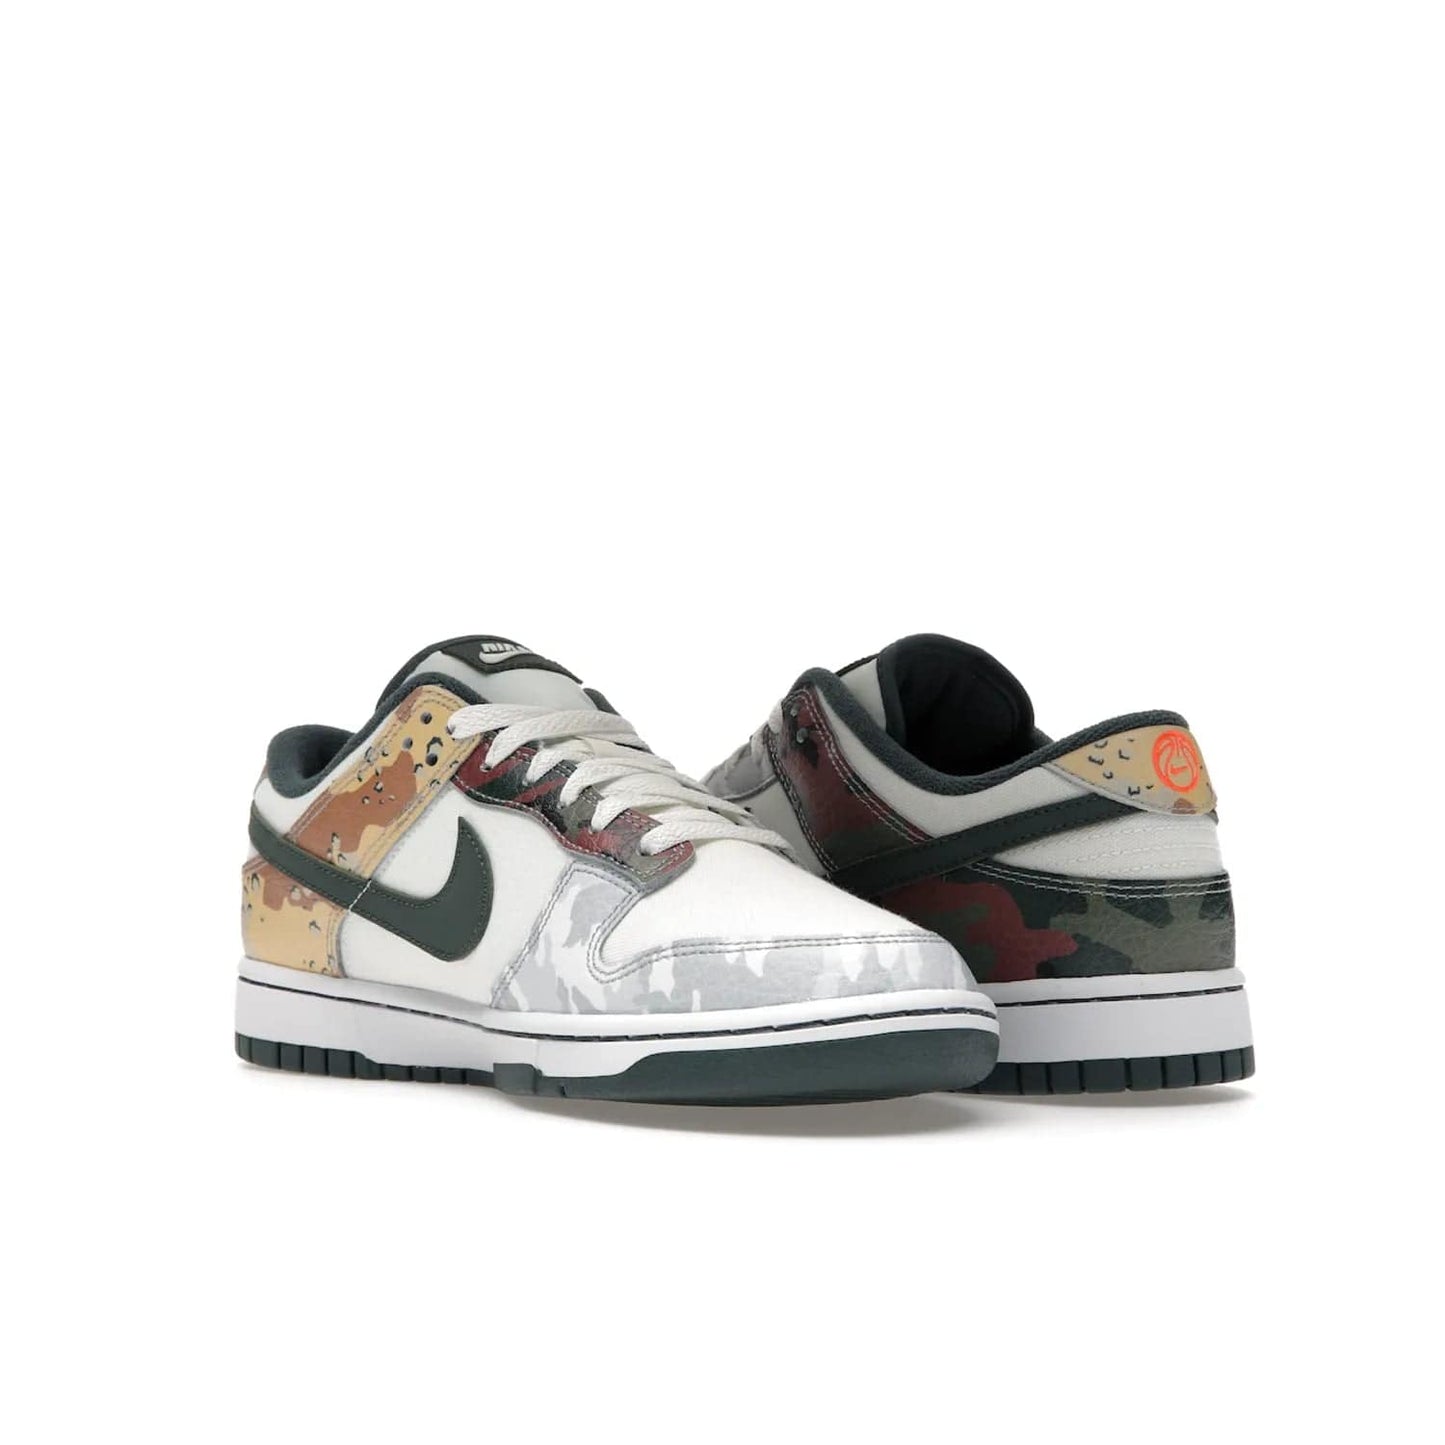 Nike Dunk Low SE Sail Multi-Camo - Image 24 - Only at www.BallersClubKickz.com - Classic design meets statement style in the Nike Dunk Low SE Sail Multi-Camo. White leather base with multi-color camo overlays, vibrant Nike Swooshes, and orange Nike embroidery. Get yours August 2021.